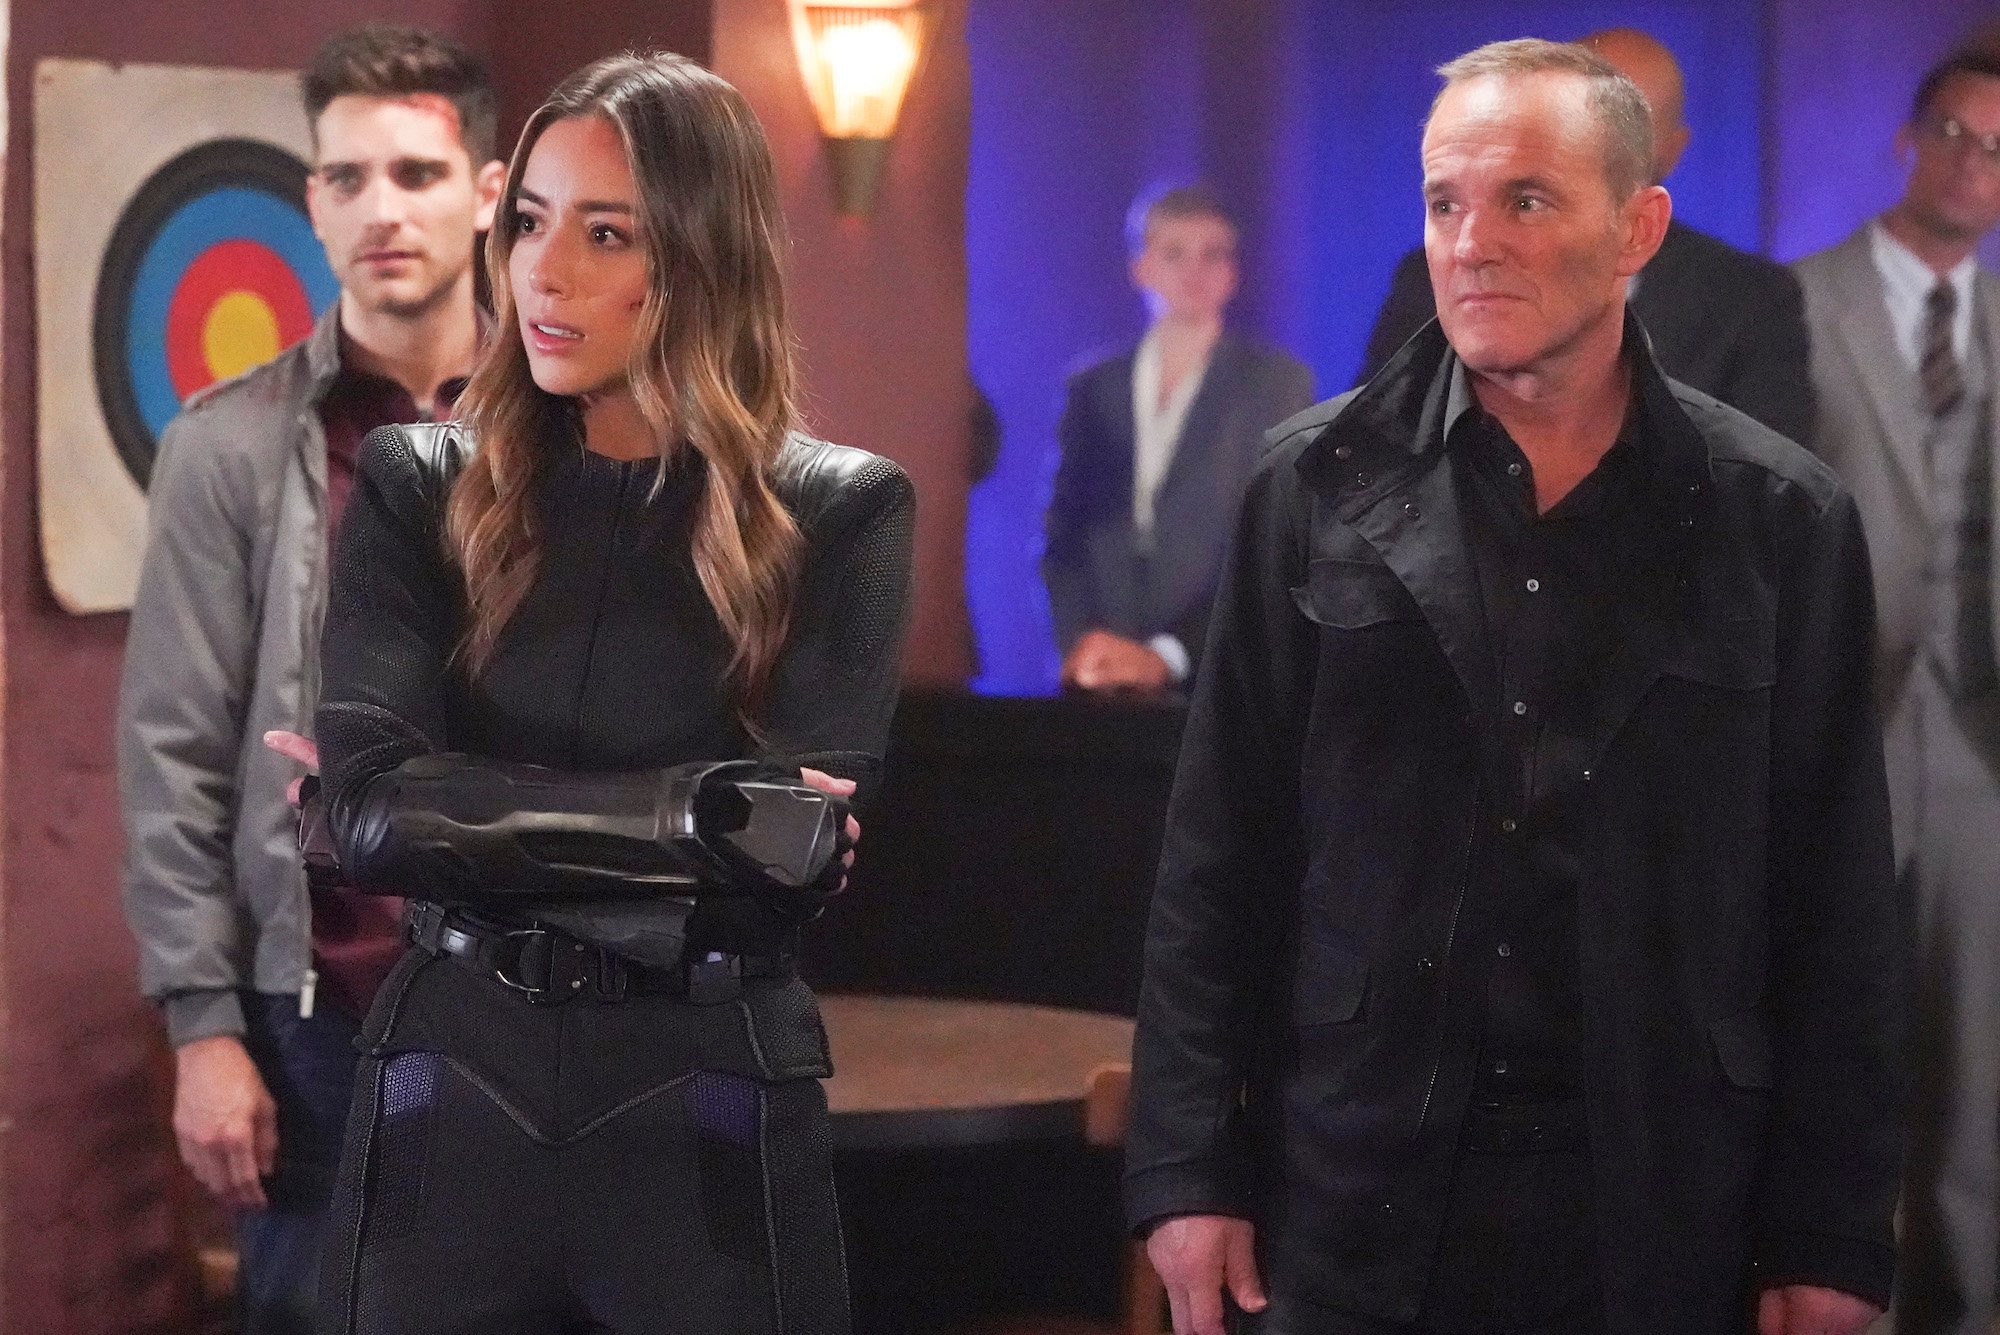 MARVEL'S AGENTS OF S.H.I.E.L.D. - "The End is at Hand/What We're Fighting For" - With their backs against the wall and Nathaniel and Sibyl edging ever closer to eliminating S.H.I.E.L.D. from the history books, the agents must rely on their strengths to outsmart and outlast the Chronicoms